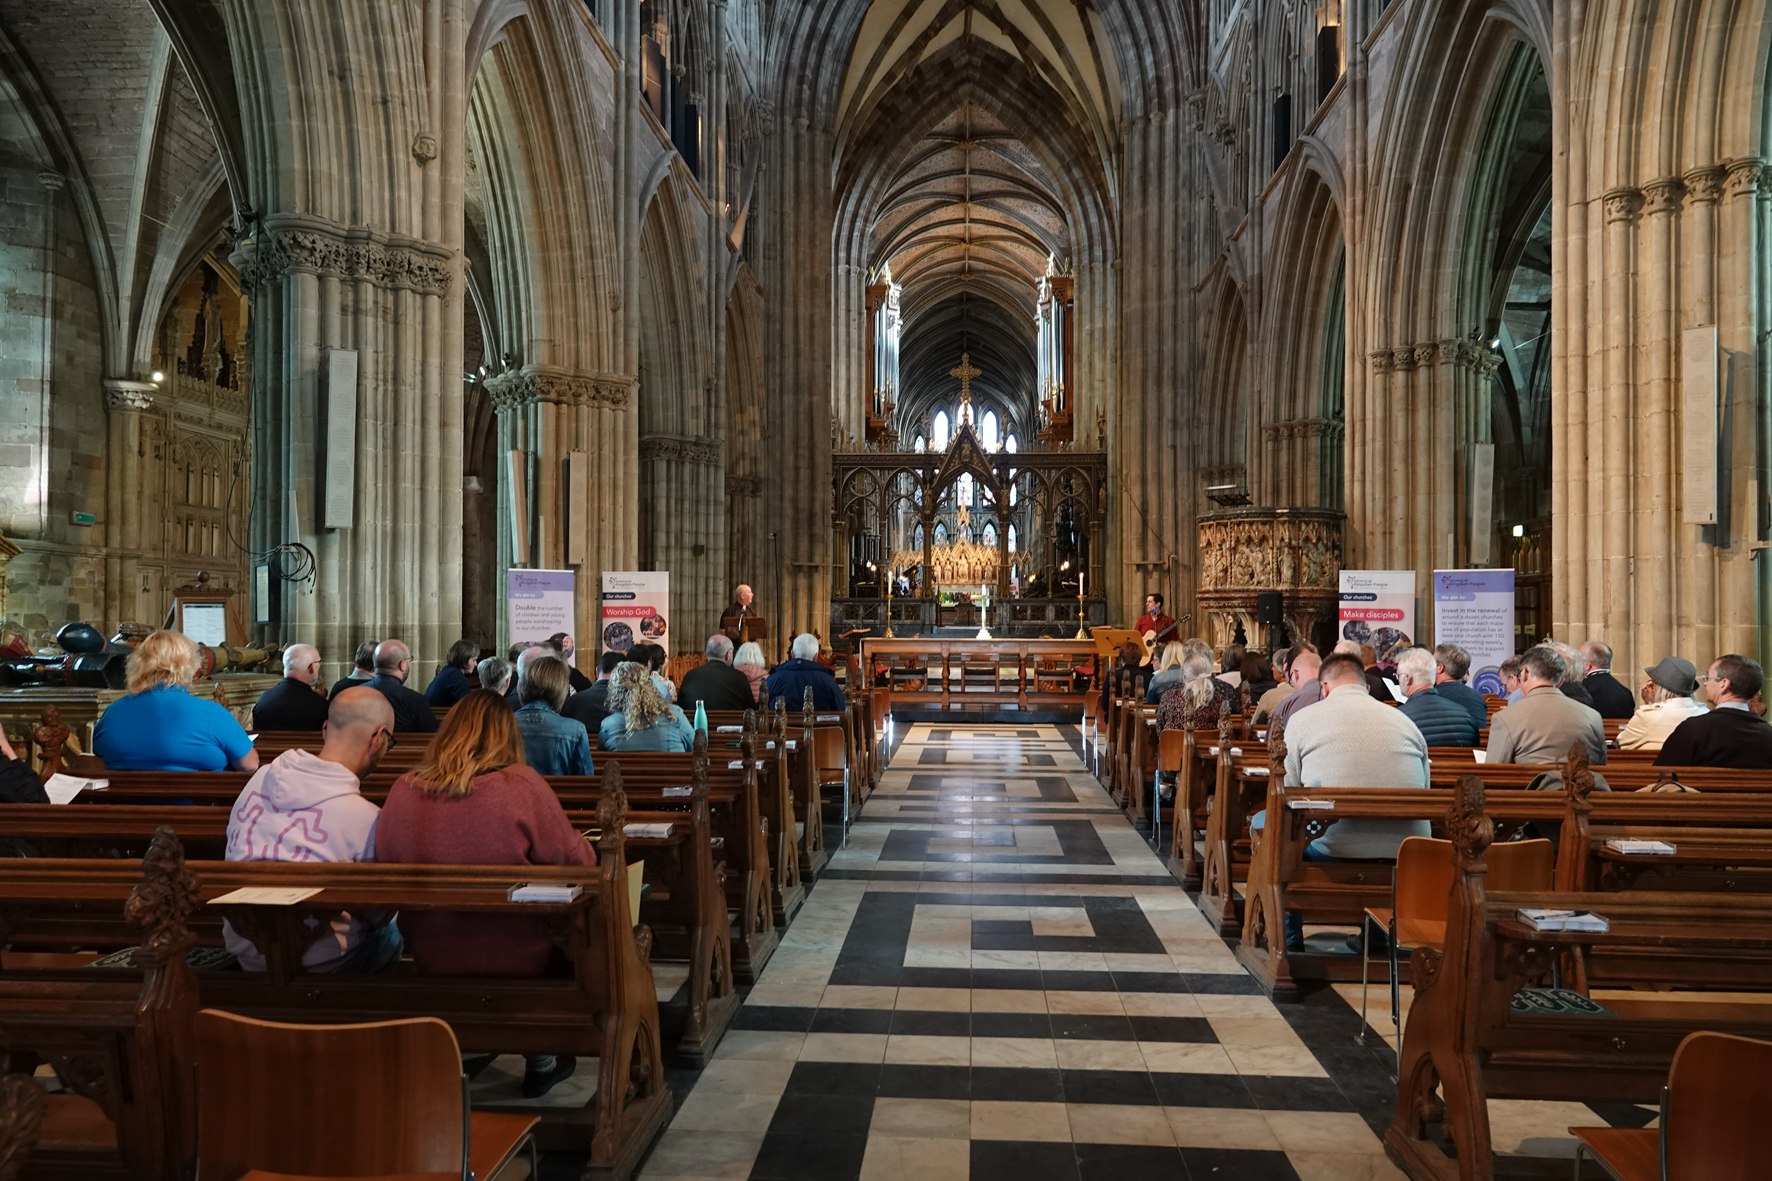 People gathered in the cathedral nave to launch praying for growth